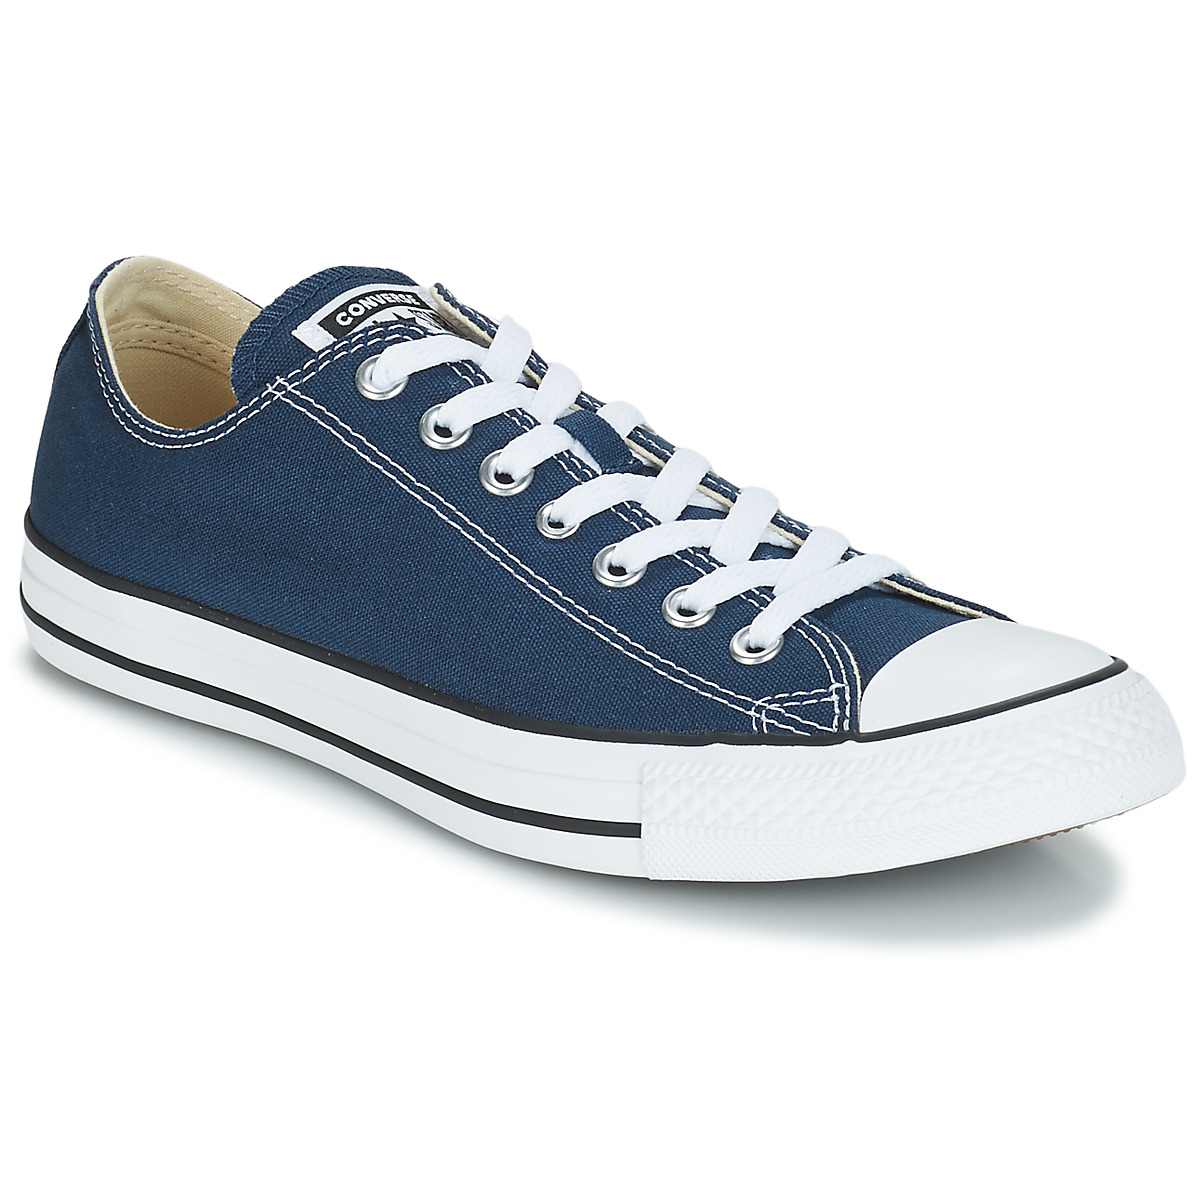 Converse Chuck Taylor All Star Sneakers Unisex - Navy